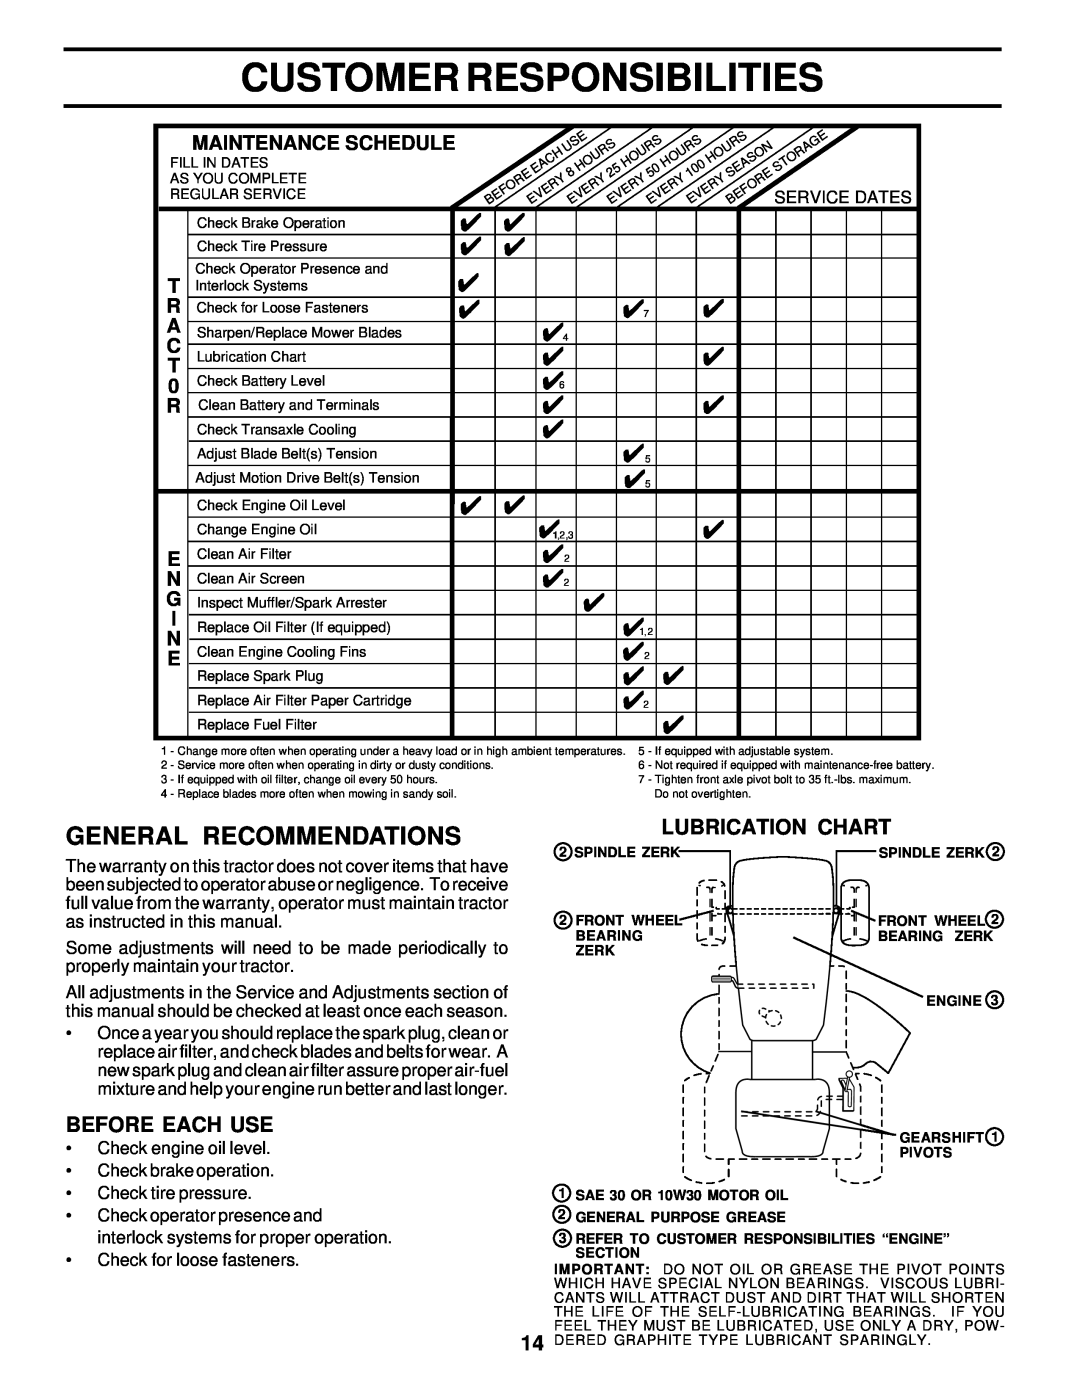 Poulan 178108 Customer Responsibilities, General Recommendations, Lubrication Chart, Before Each Use, Maintenance Schedule 